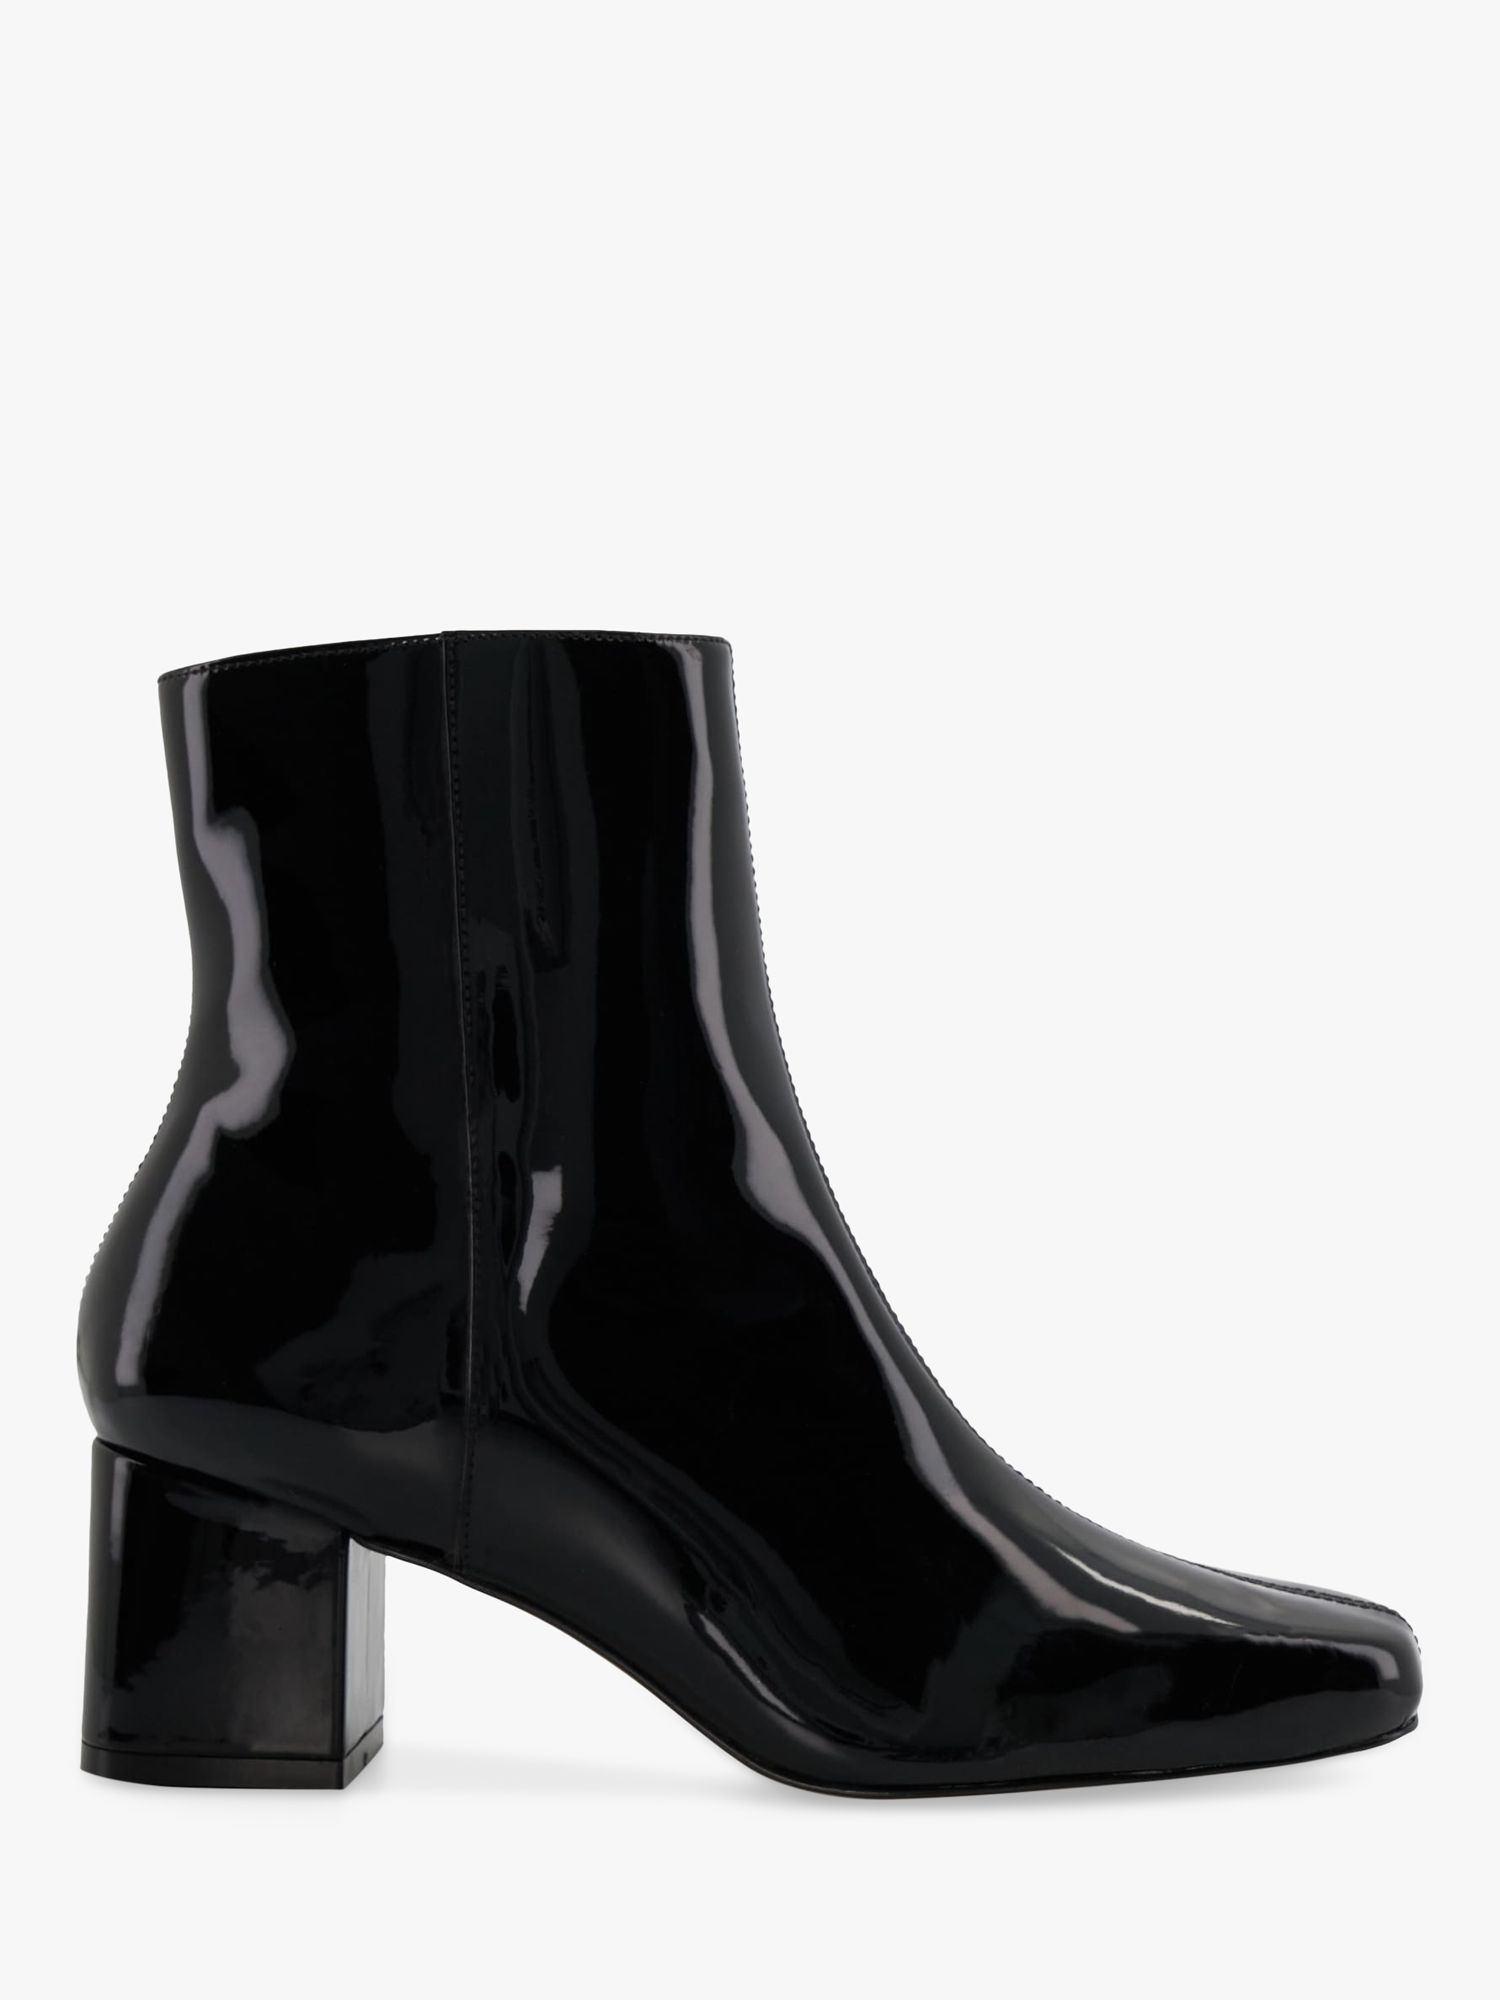 Dune Onsen Patent Square Toe Ankle Boots, Black at John Lewis & Partners